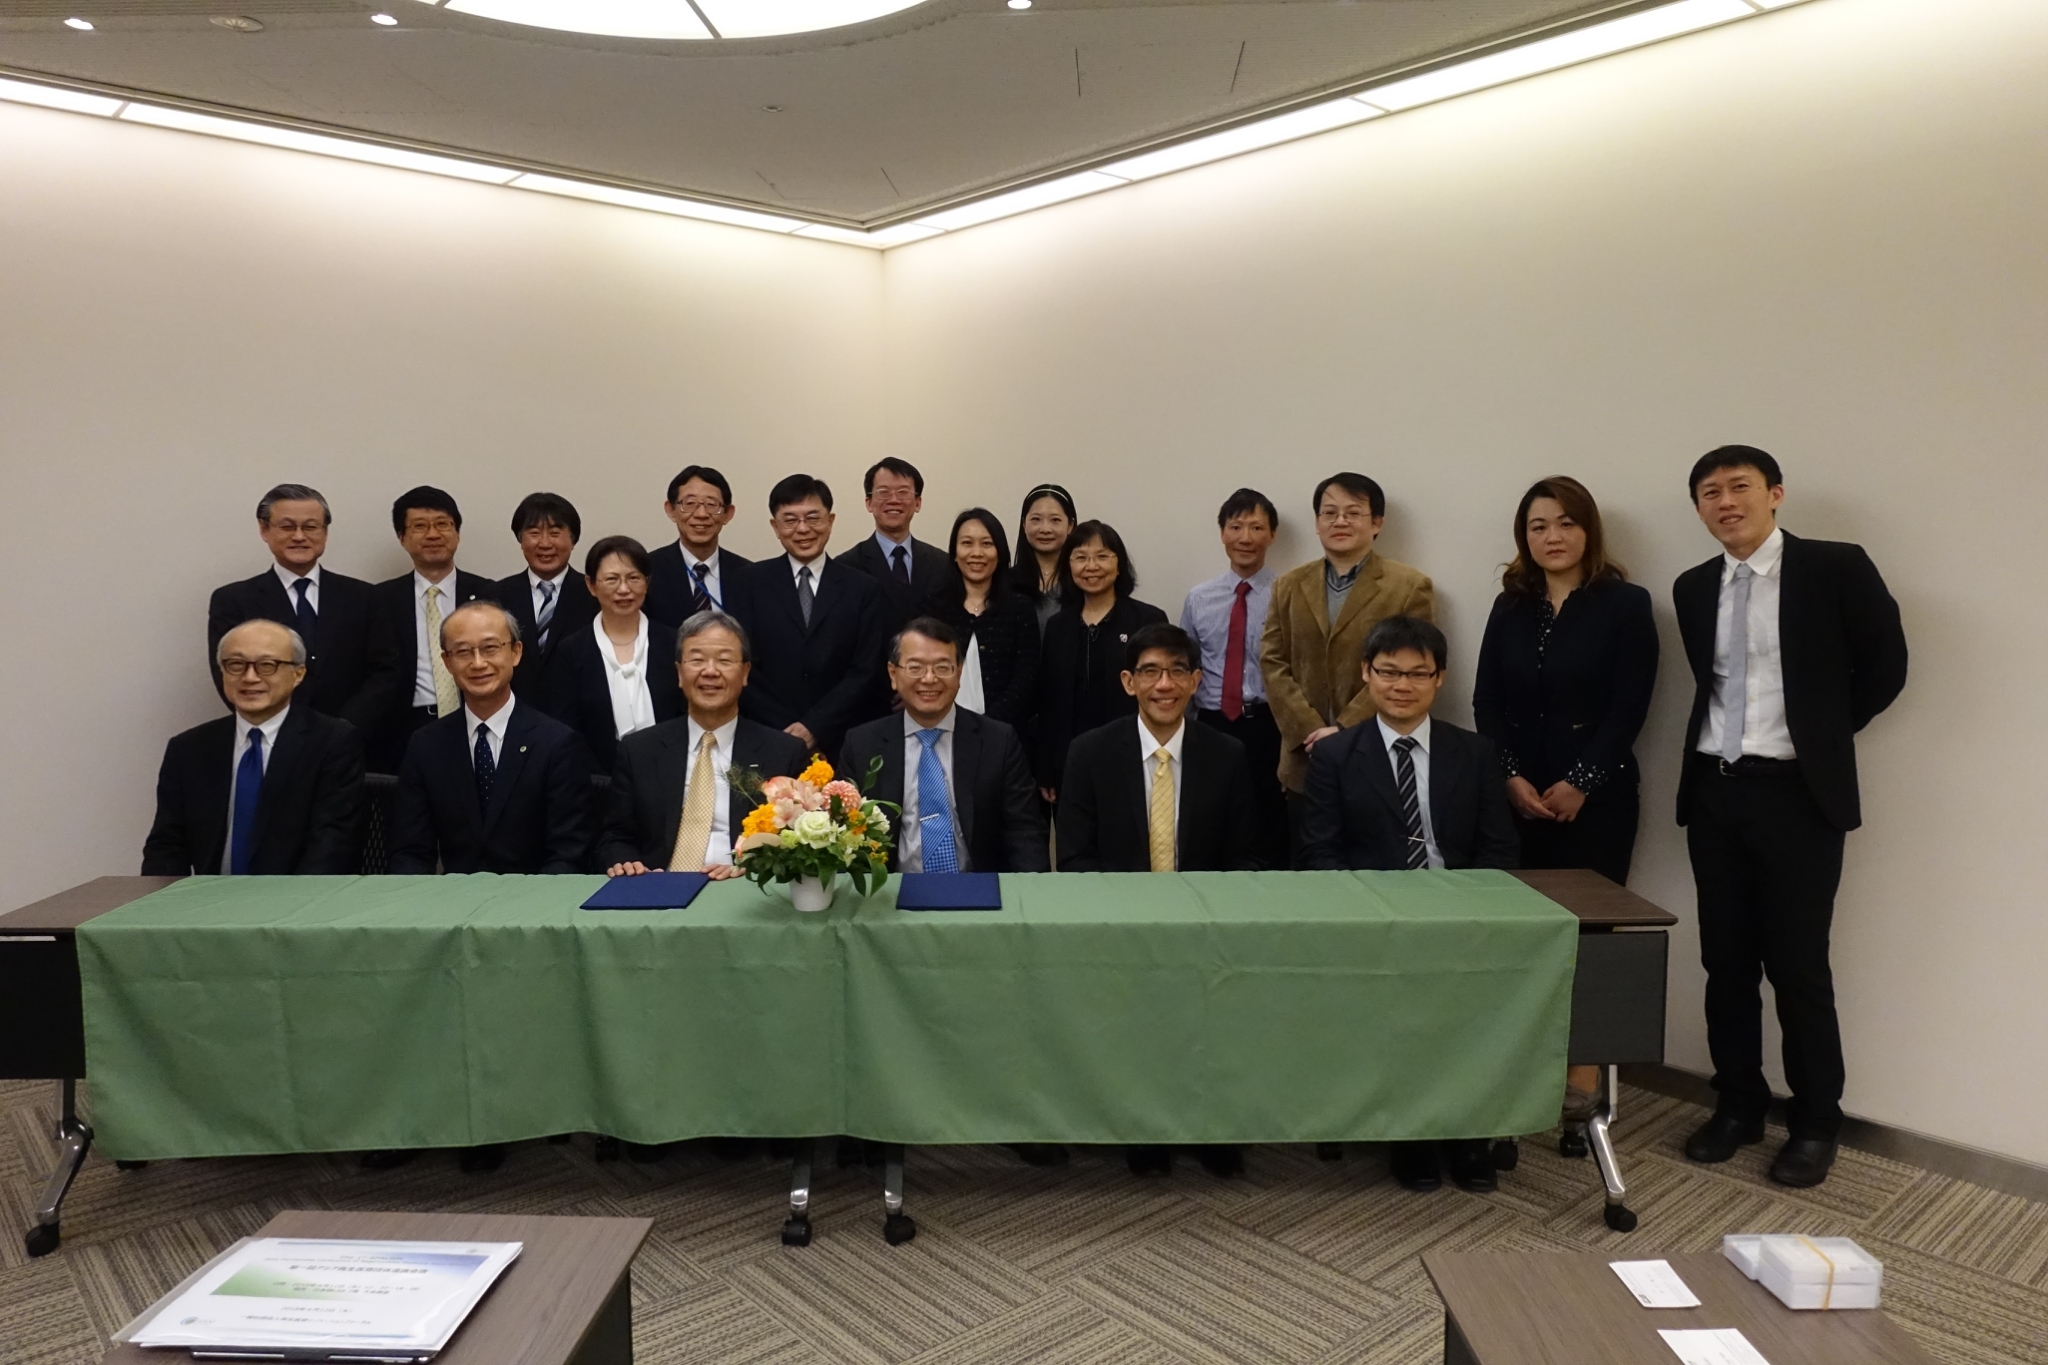 On April 11, 2018, BPIPO and FIRM signed a Memorandum of Understanding (MoU) to take photos together. 